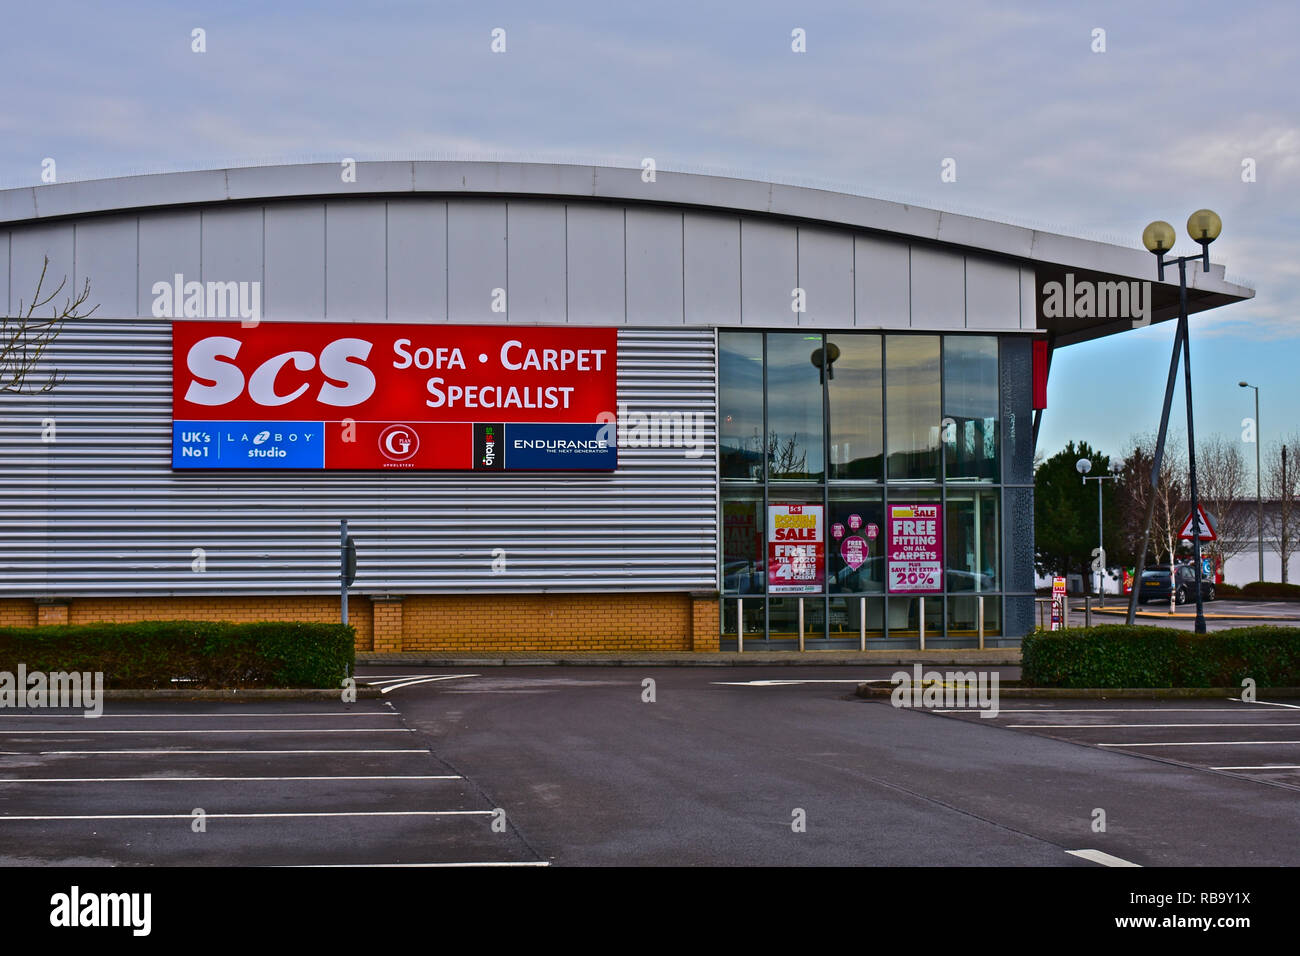 The modern ScS retail store selling Sofas, Carpets and floor coverings. Bridgend Retail Park, South Wales Stock Photo